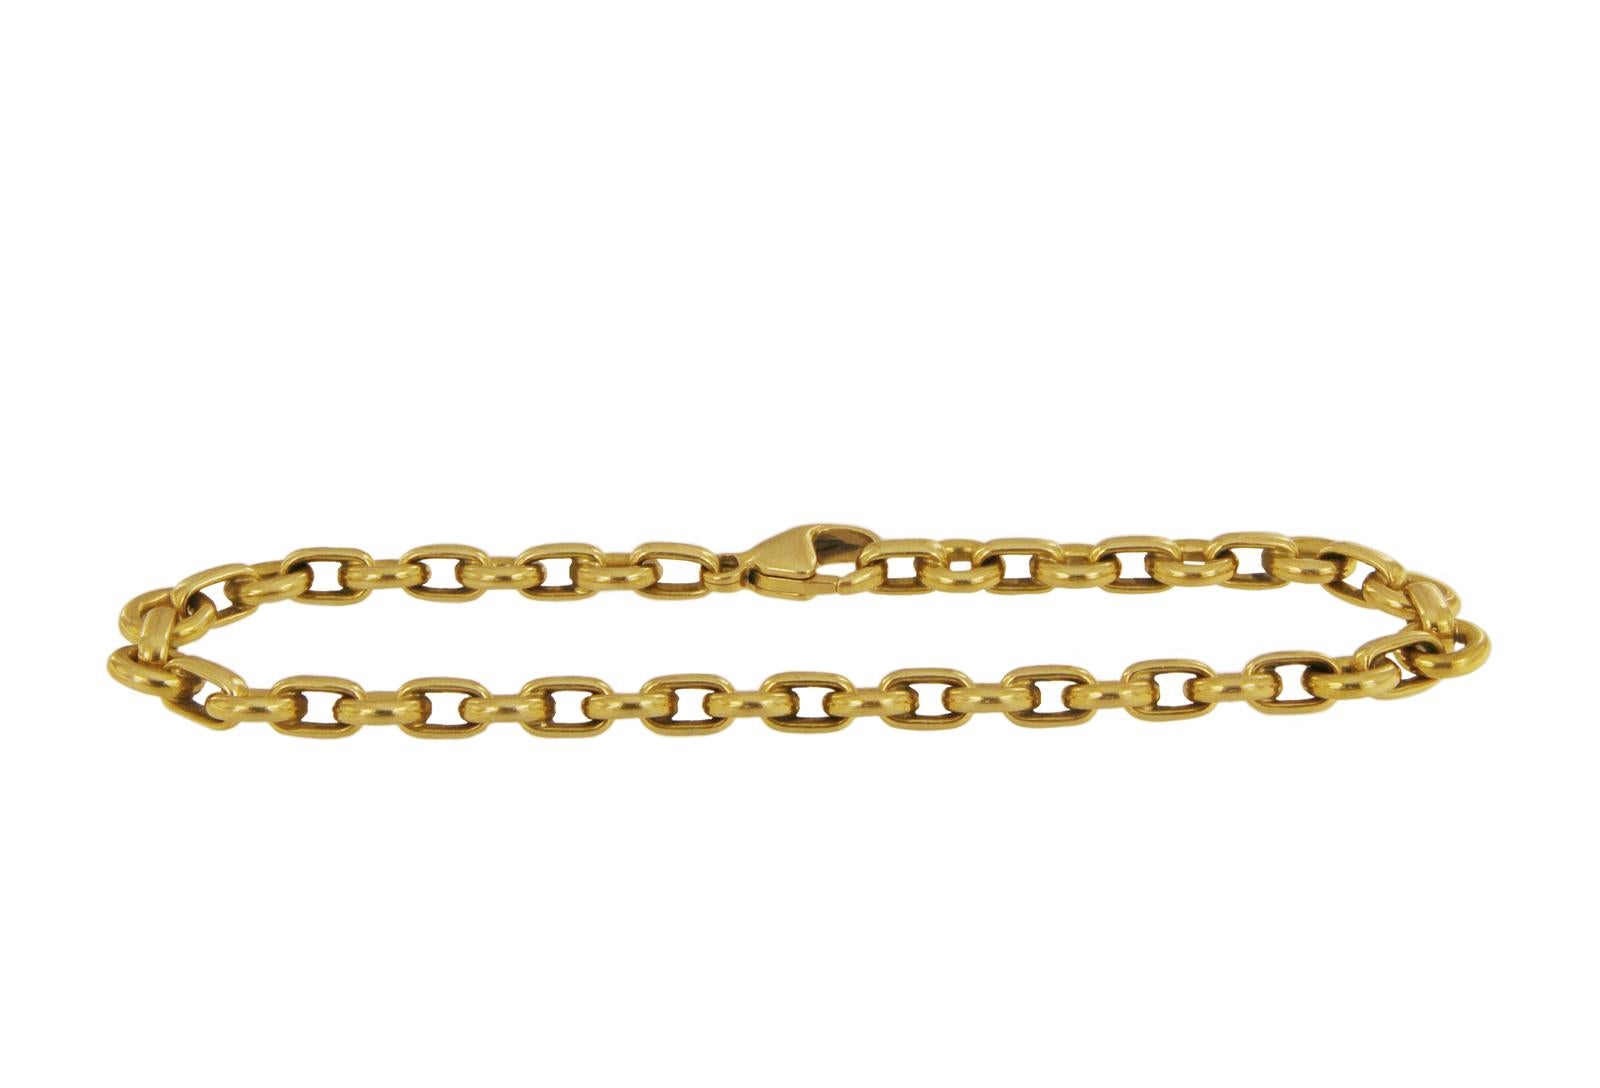 Mint condition
18k Yellow Gold
Length: 7”
Width: 6mm
Weight: 18gr

*Comes with Tiffany box.